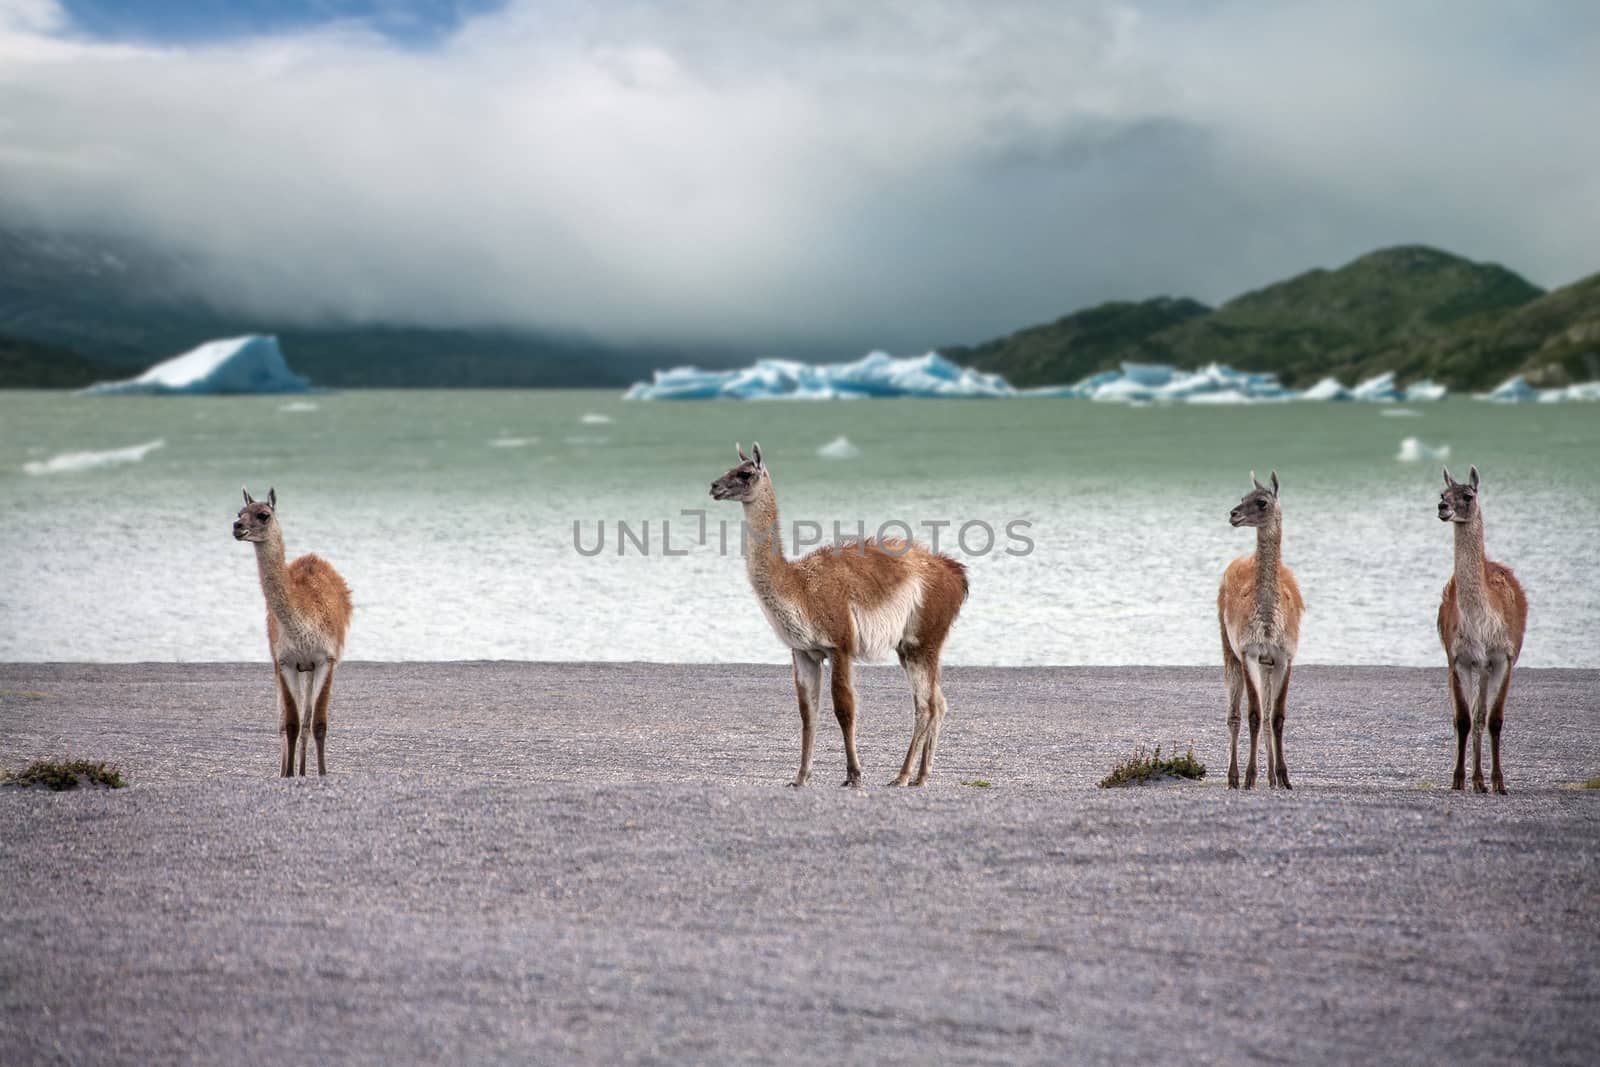 A group of Guanaco (Lama guanicoe) in Torres del Paine National Park in Patagonia in southern Chile.